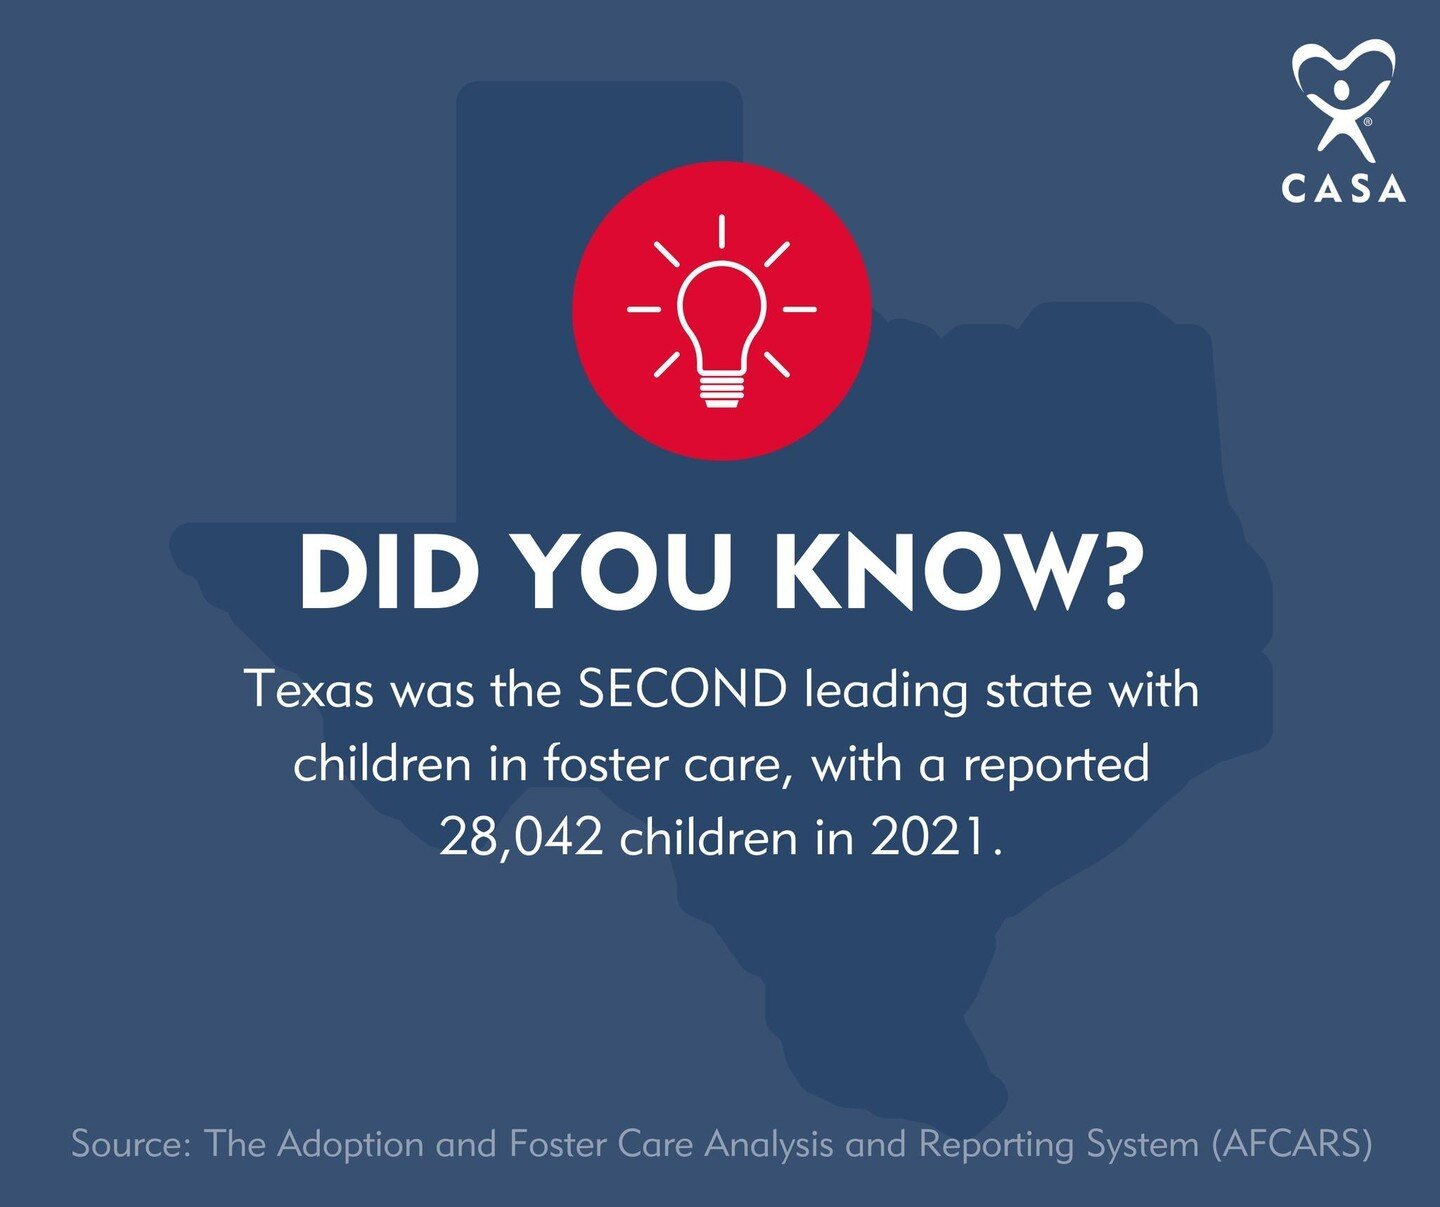 Did you know? Texas was the second leading state with the most children in foster care, with a reported 28,042 children in 2021. ❤️&zwj;🩹 Join us as we advocate for these children + families who deserve stability, love and bright futures. 
👉 Learn 